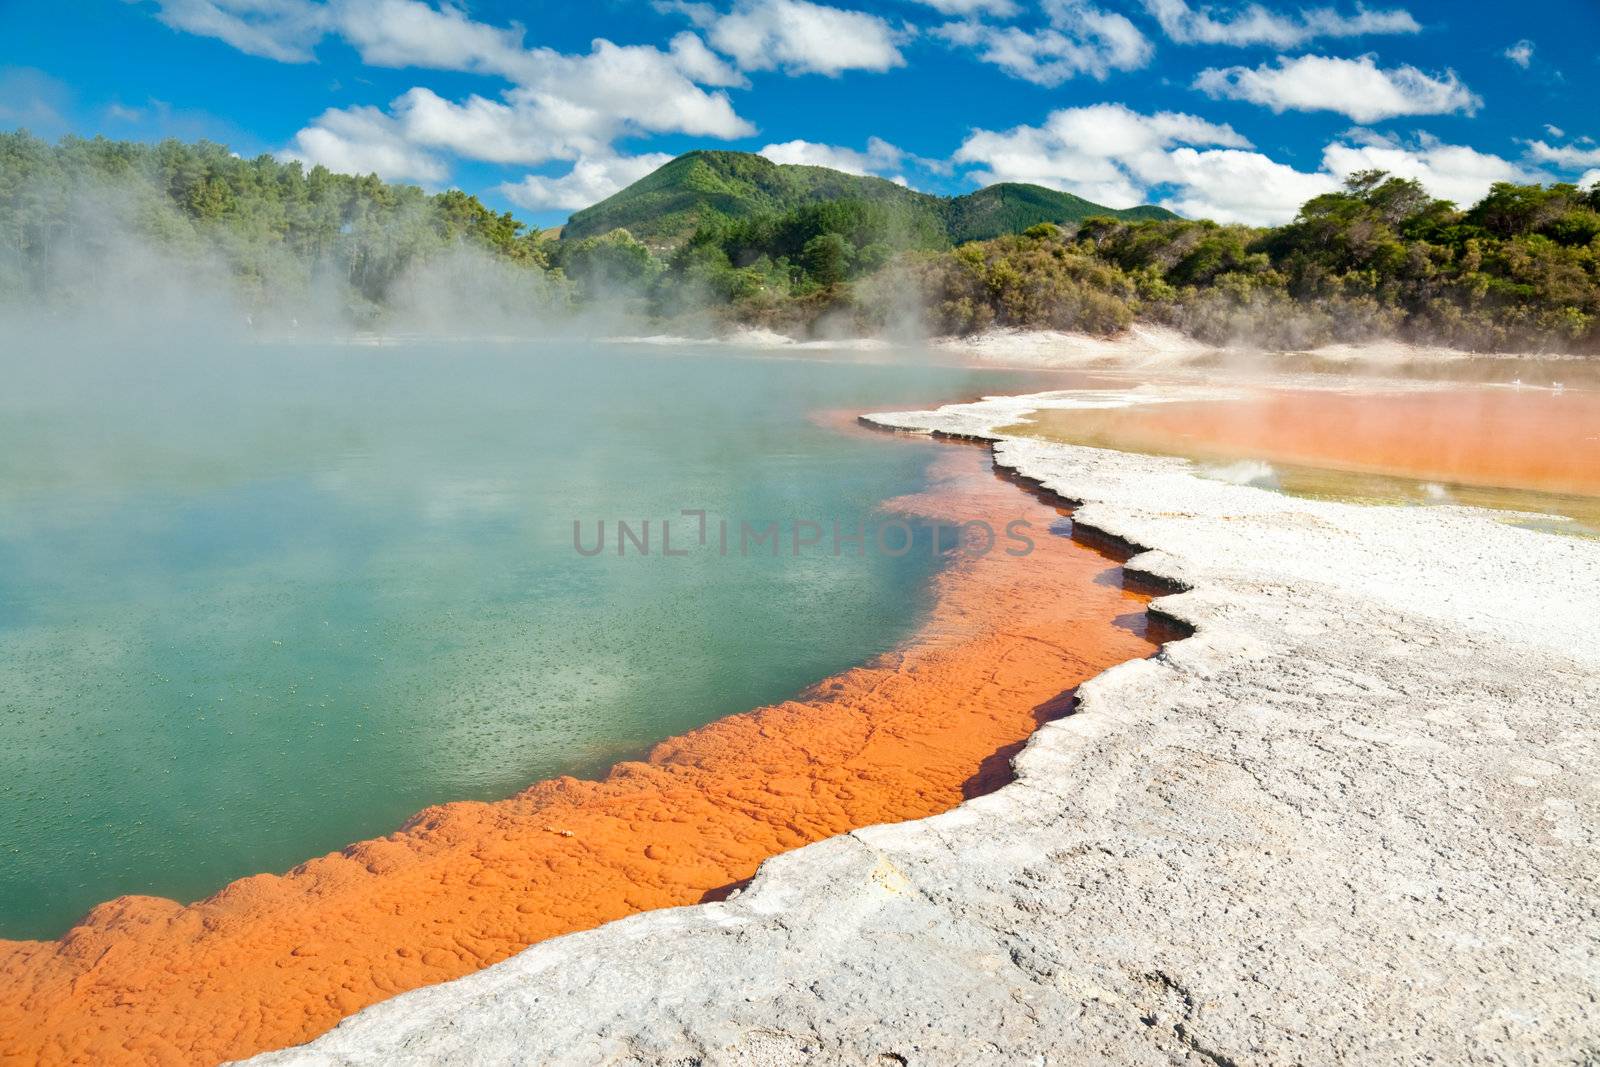 Champagne Pool at Wai-O-Tapu geothermal area in New Zealand